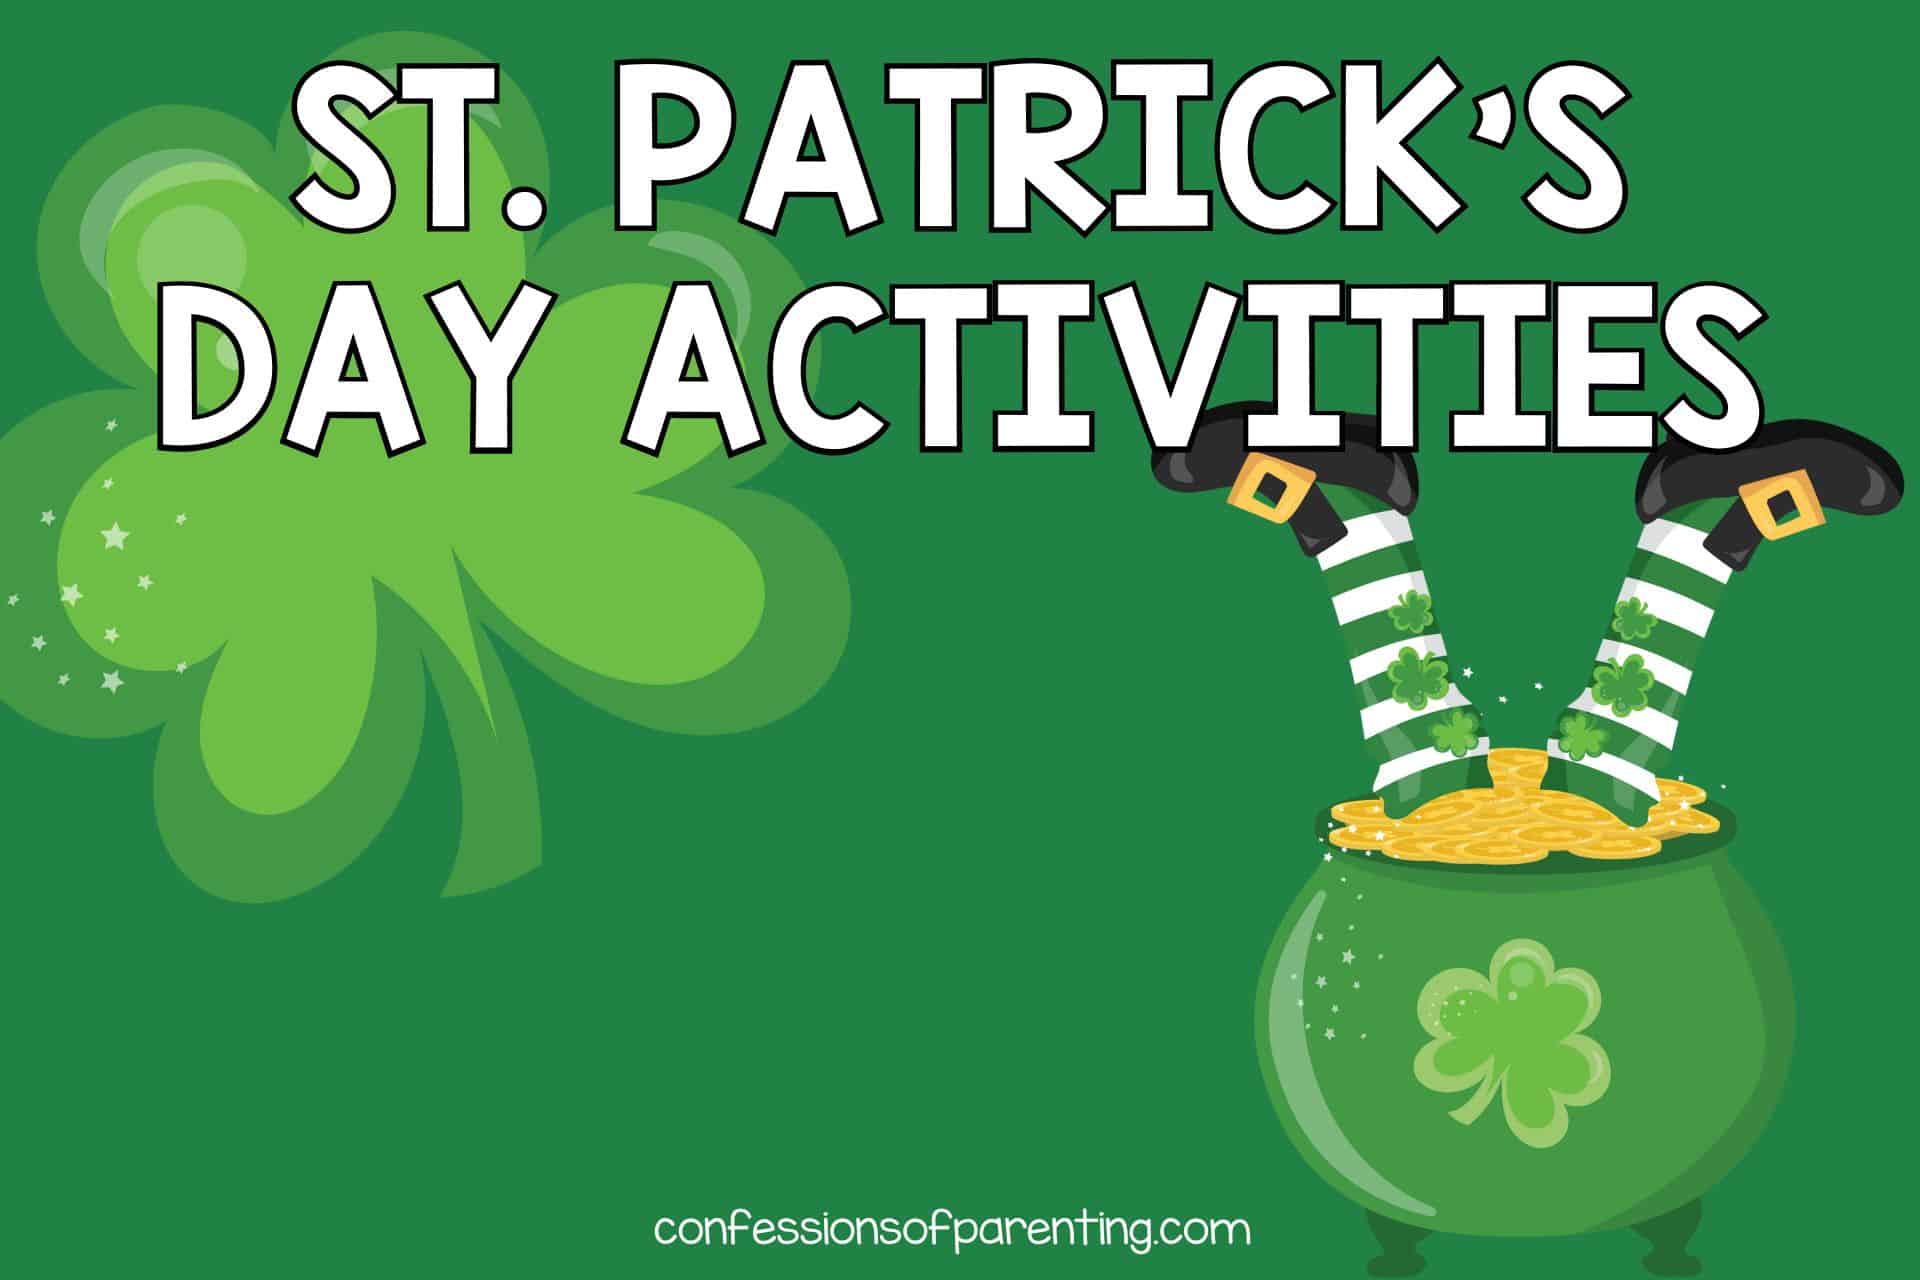 24 Fun St. Patrick’s Day Activities Perfect for Families